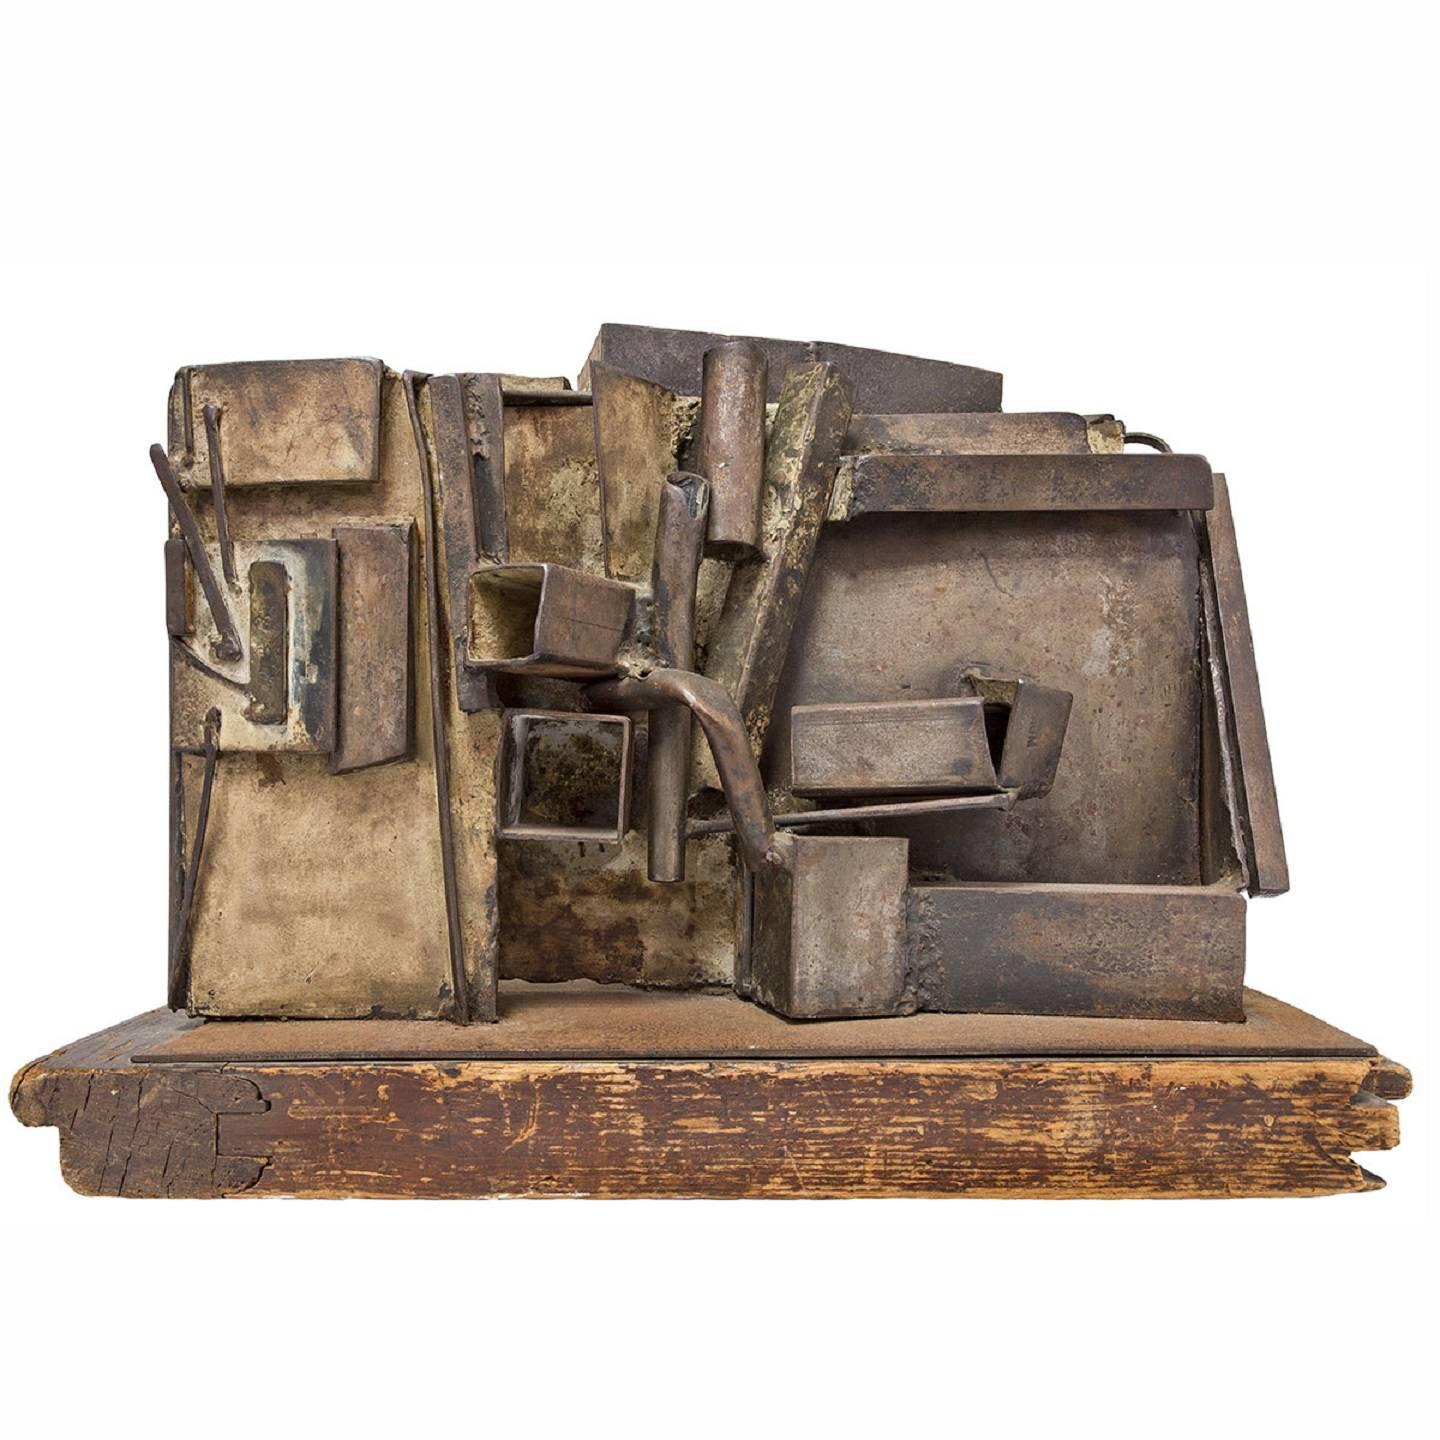  Large Abstract Expressionist Welded Assemblage Sculpture. it appears unsigned. it is on a found wood original base. it has a Brutalist quality to it. It commands a lot of presence